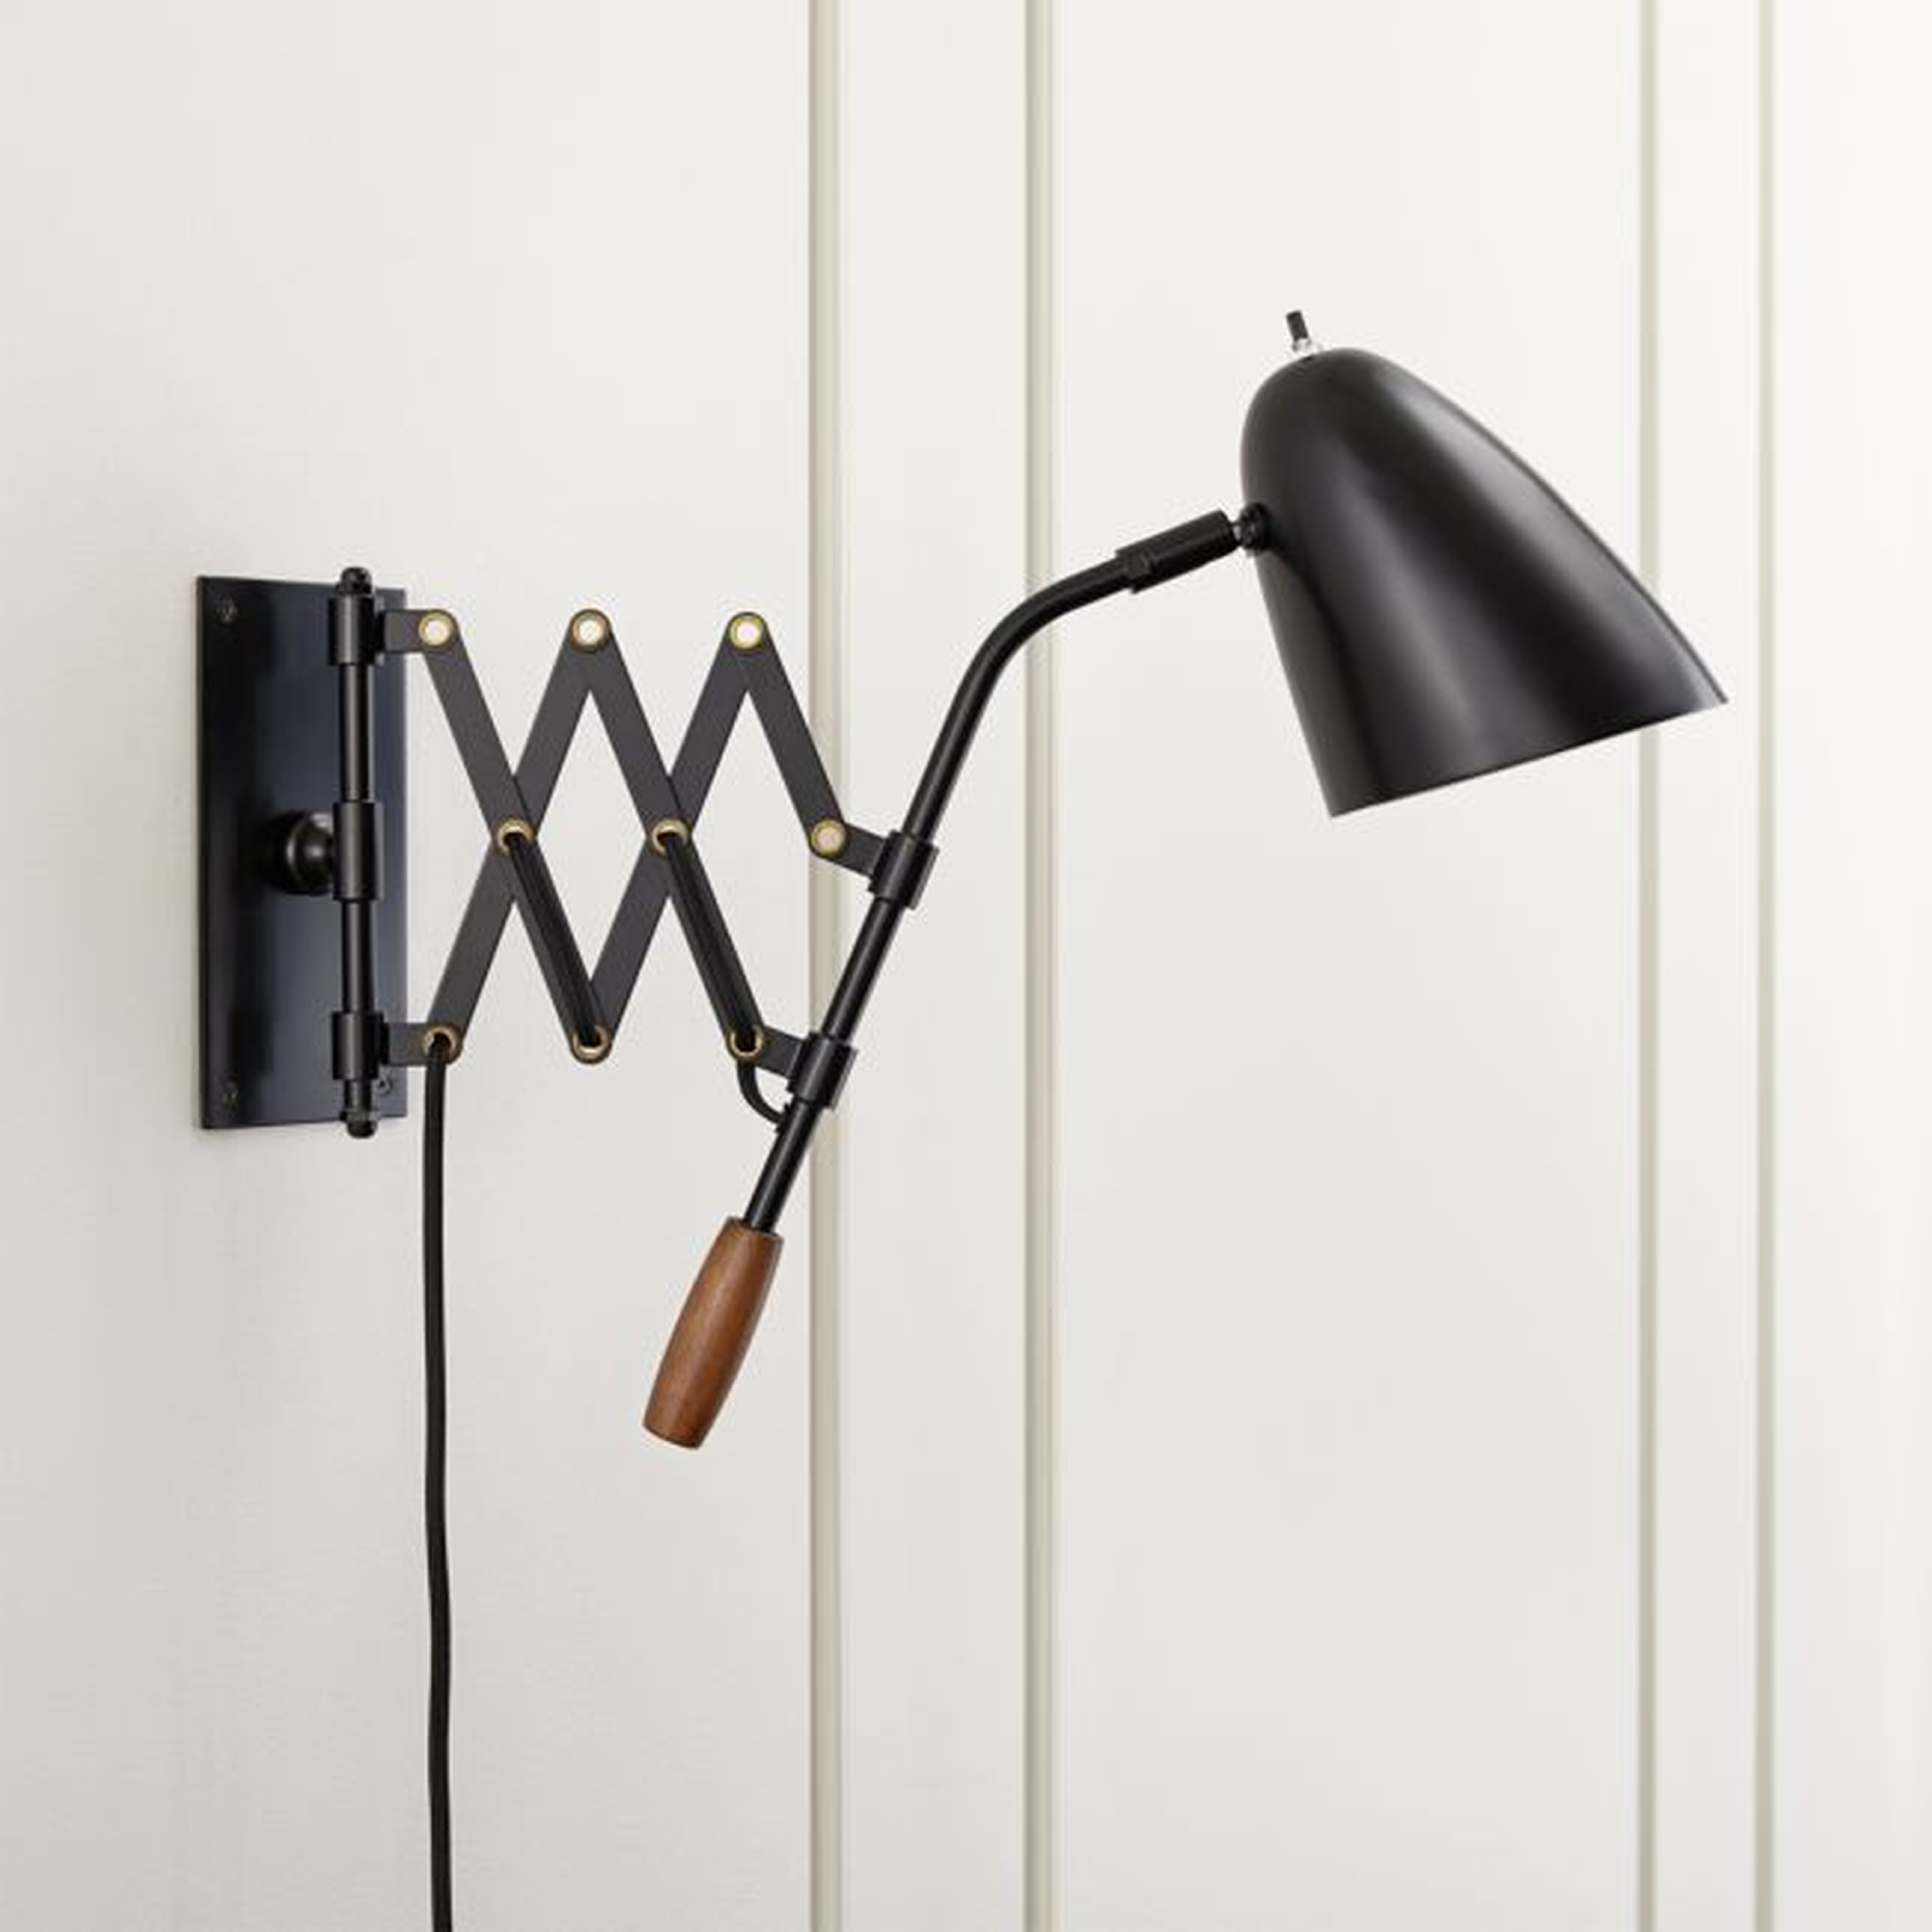 Morgan Black Adjustable Arm Plug In Wall Sconce Light - Crate and Barrel